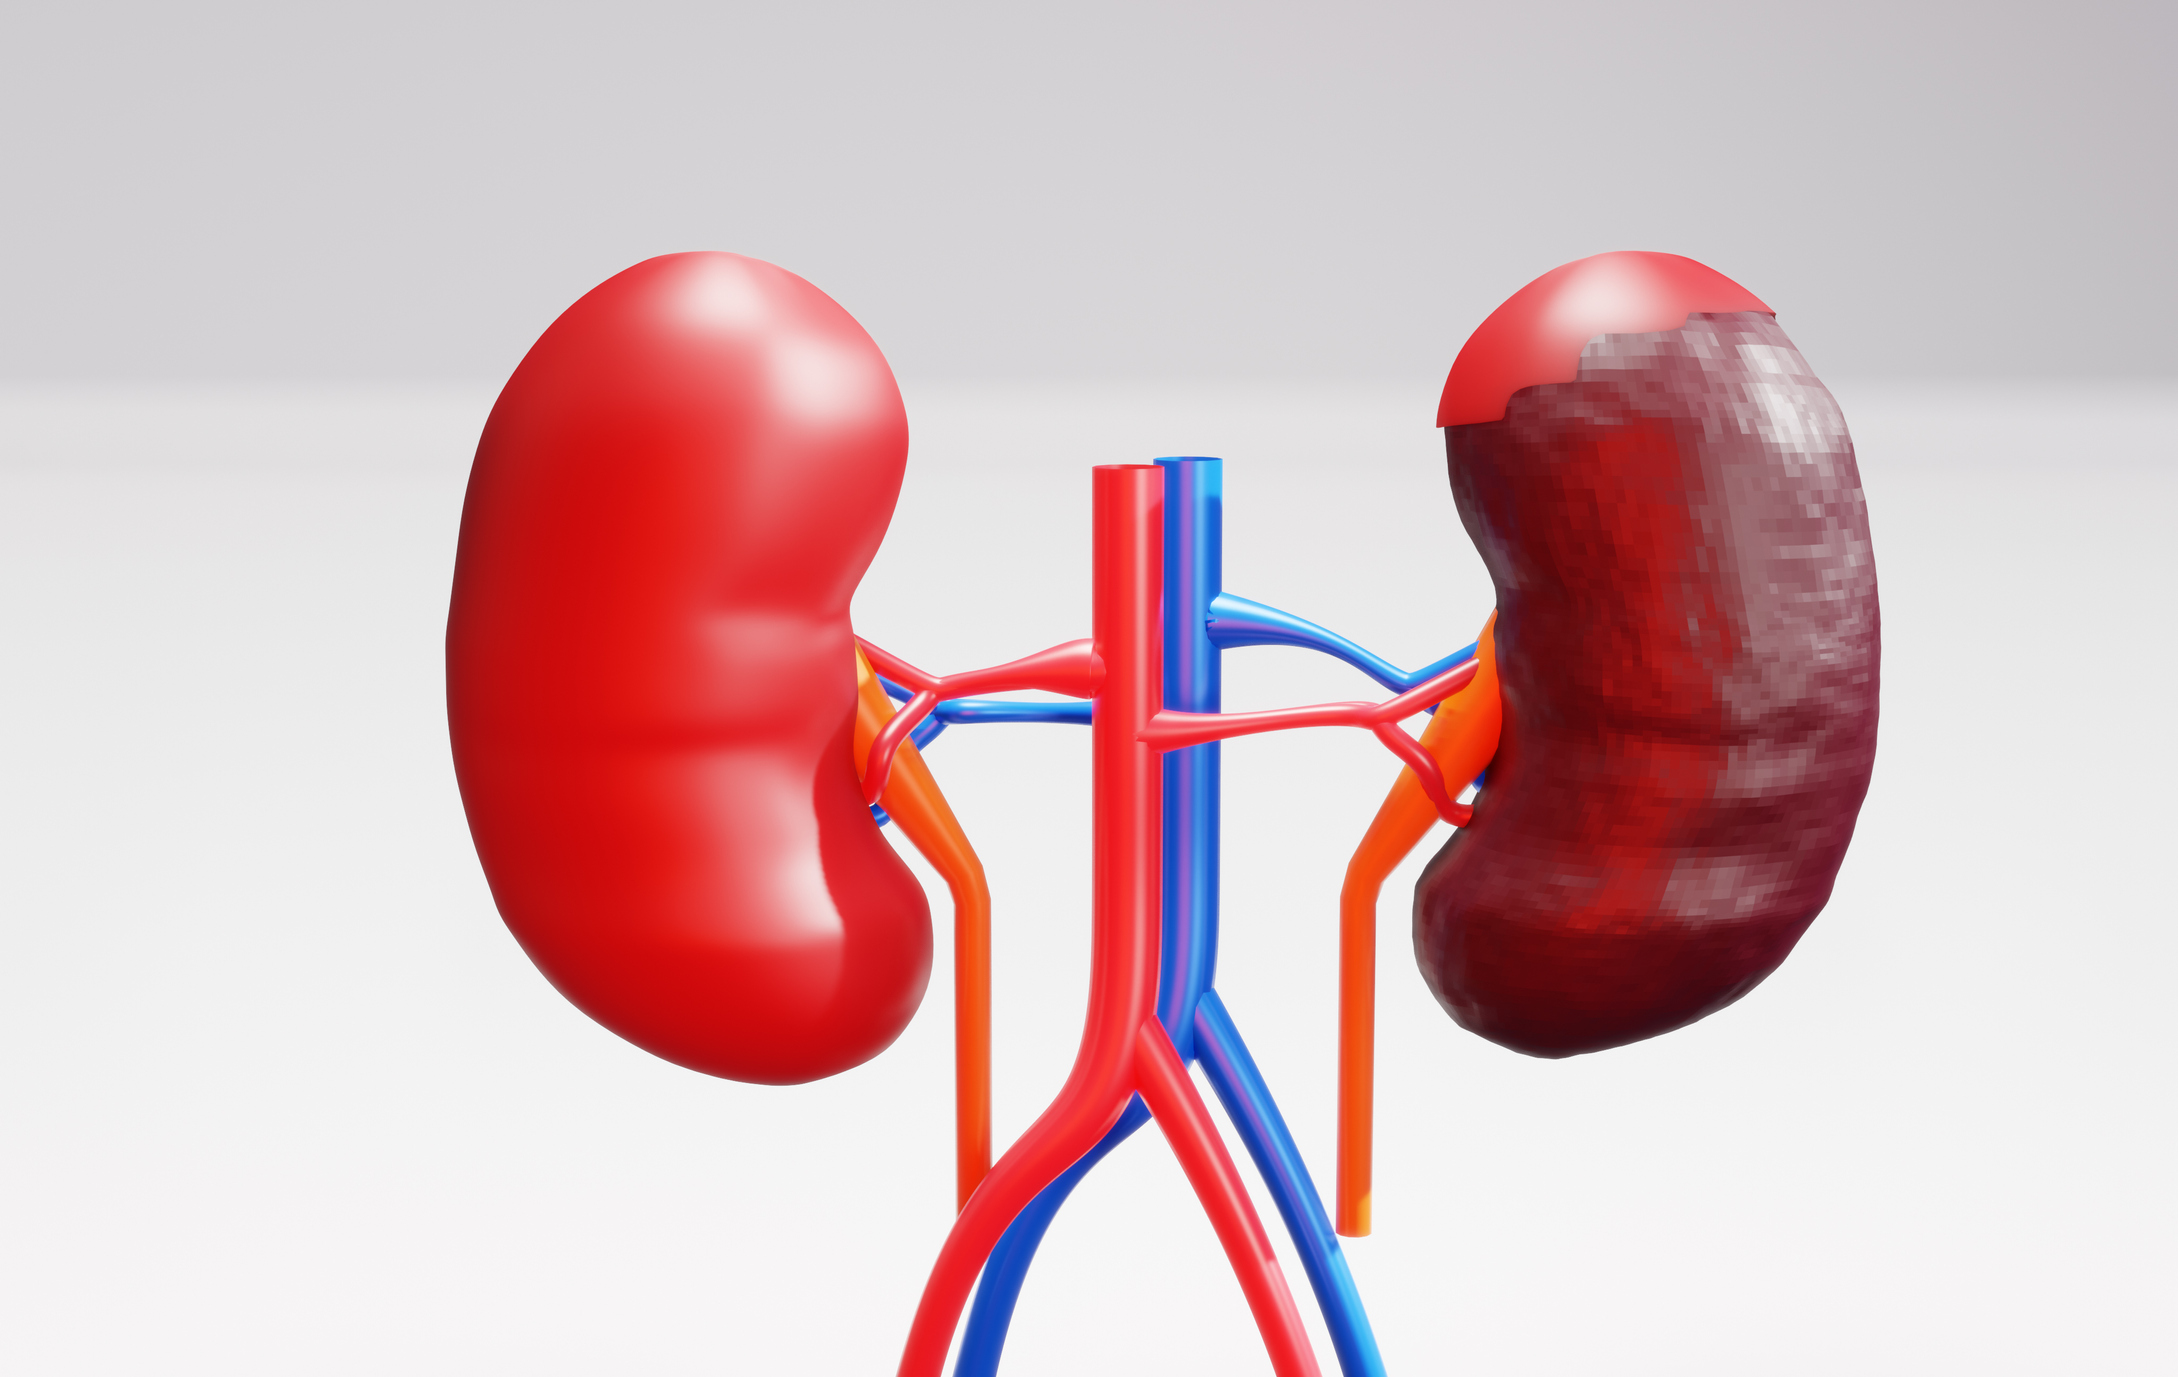 human kidneys disease anatomy outside 3d rendering image Concept of urinary system image